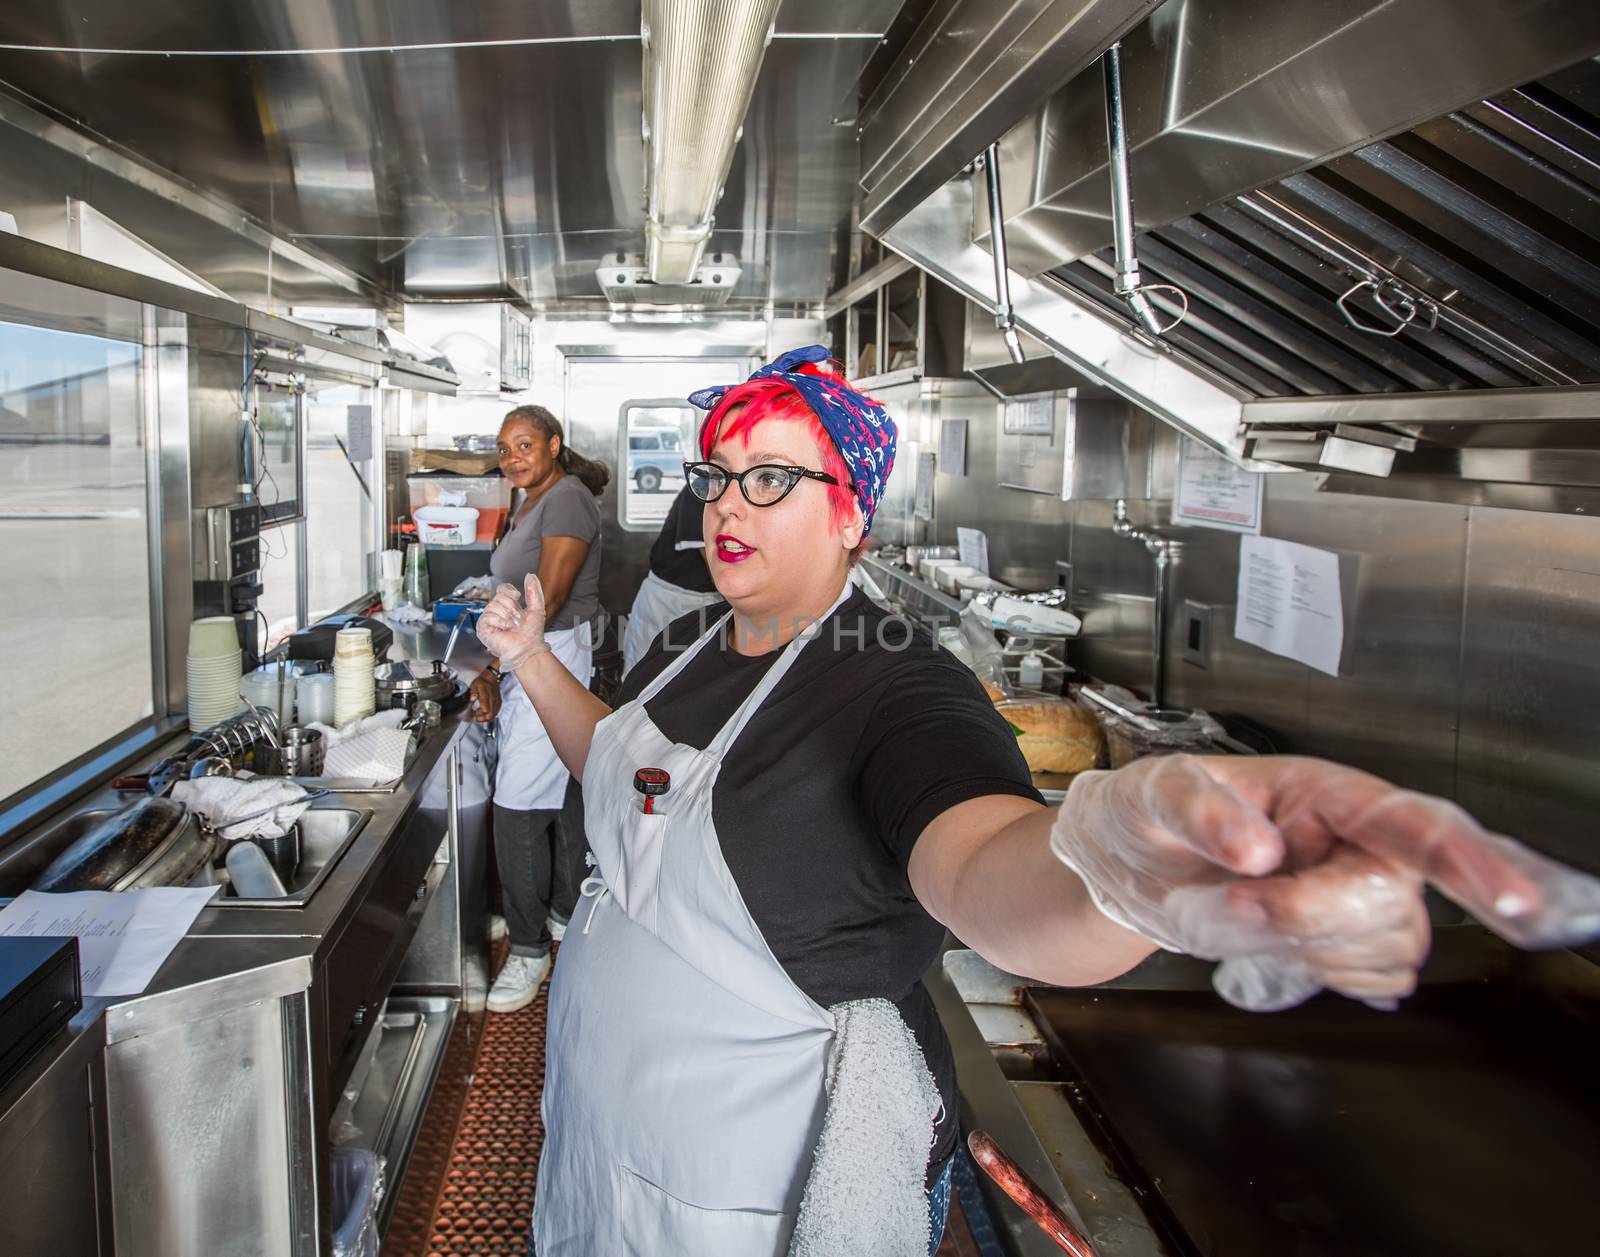 Chef Directs Crew on Food Truck by Creatista